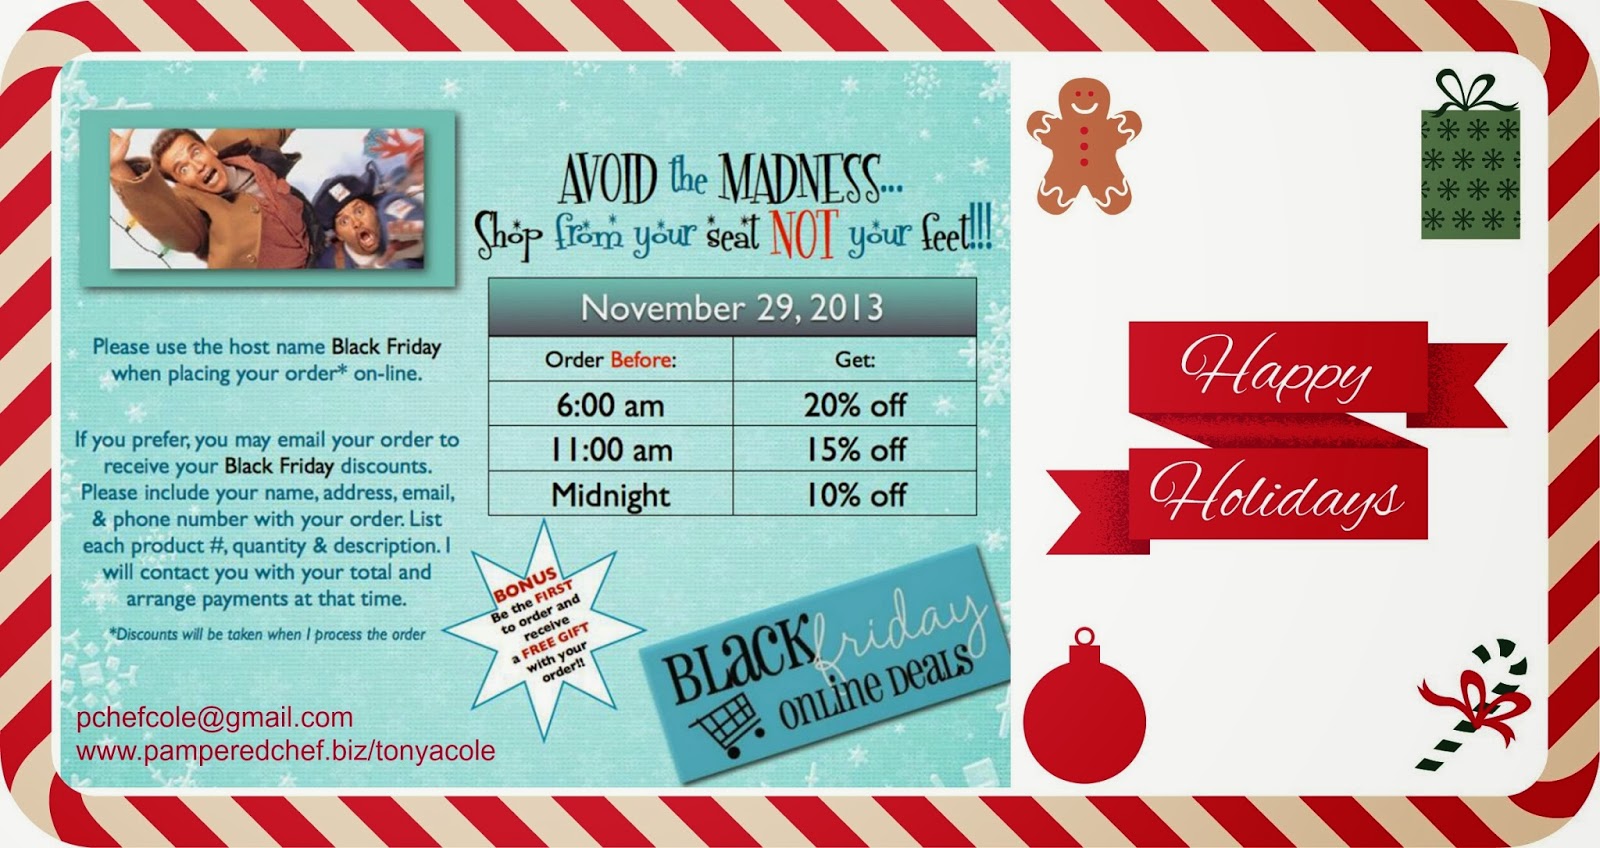 Boutique Black Friday Deals: Pampered Chef - Does Pampered Chef Do Black Friday Deals